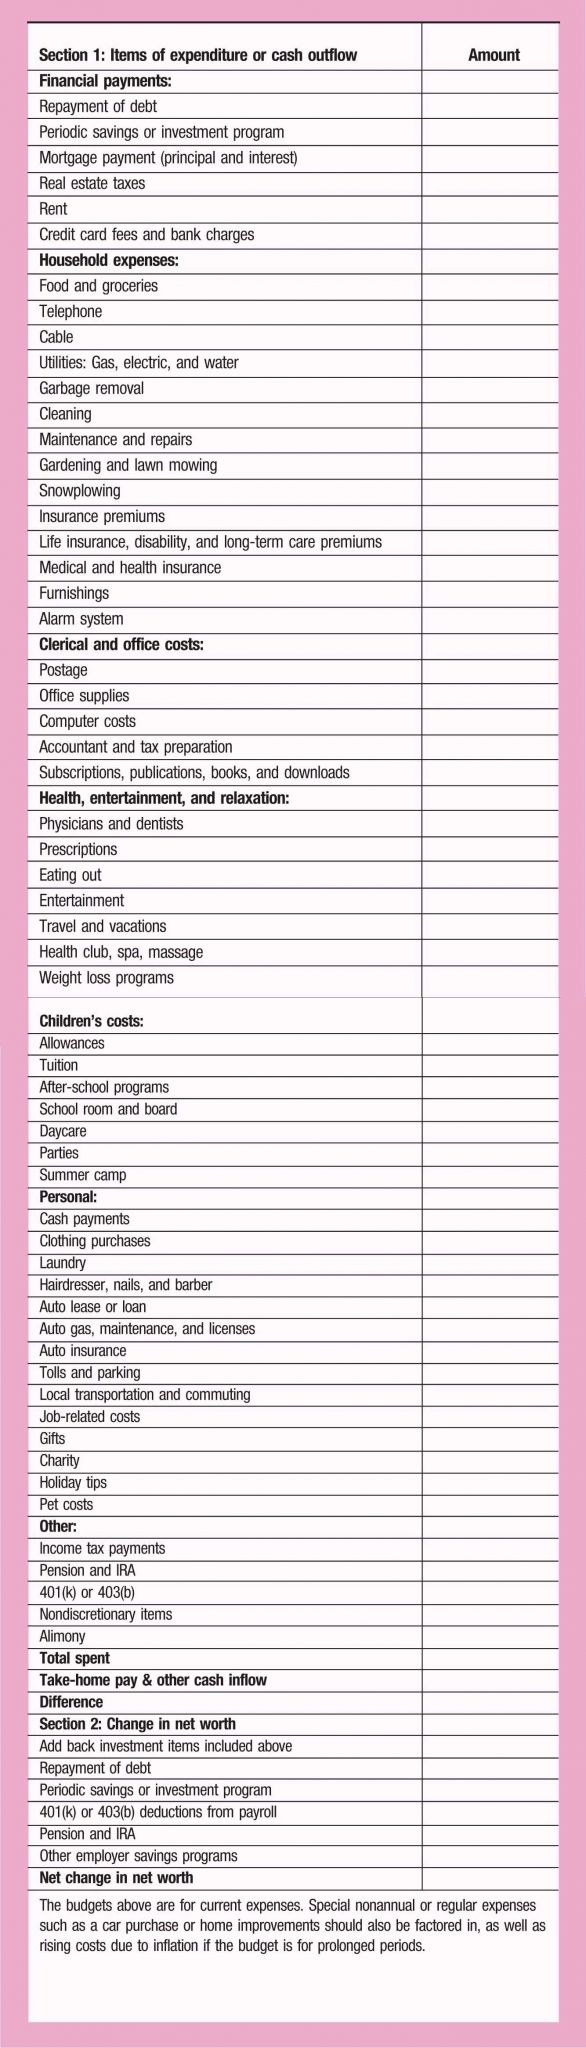 Itemized Deductions Worksheet Also Clothing Deduction Worksheet New Clothing Donation Worksheet for